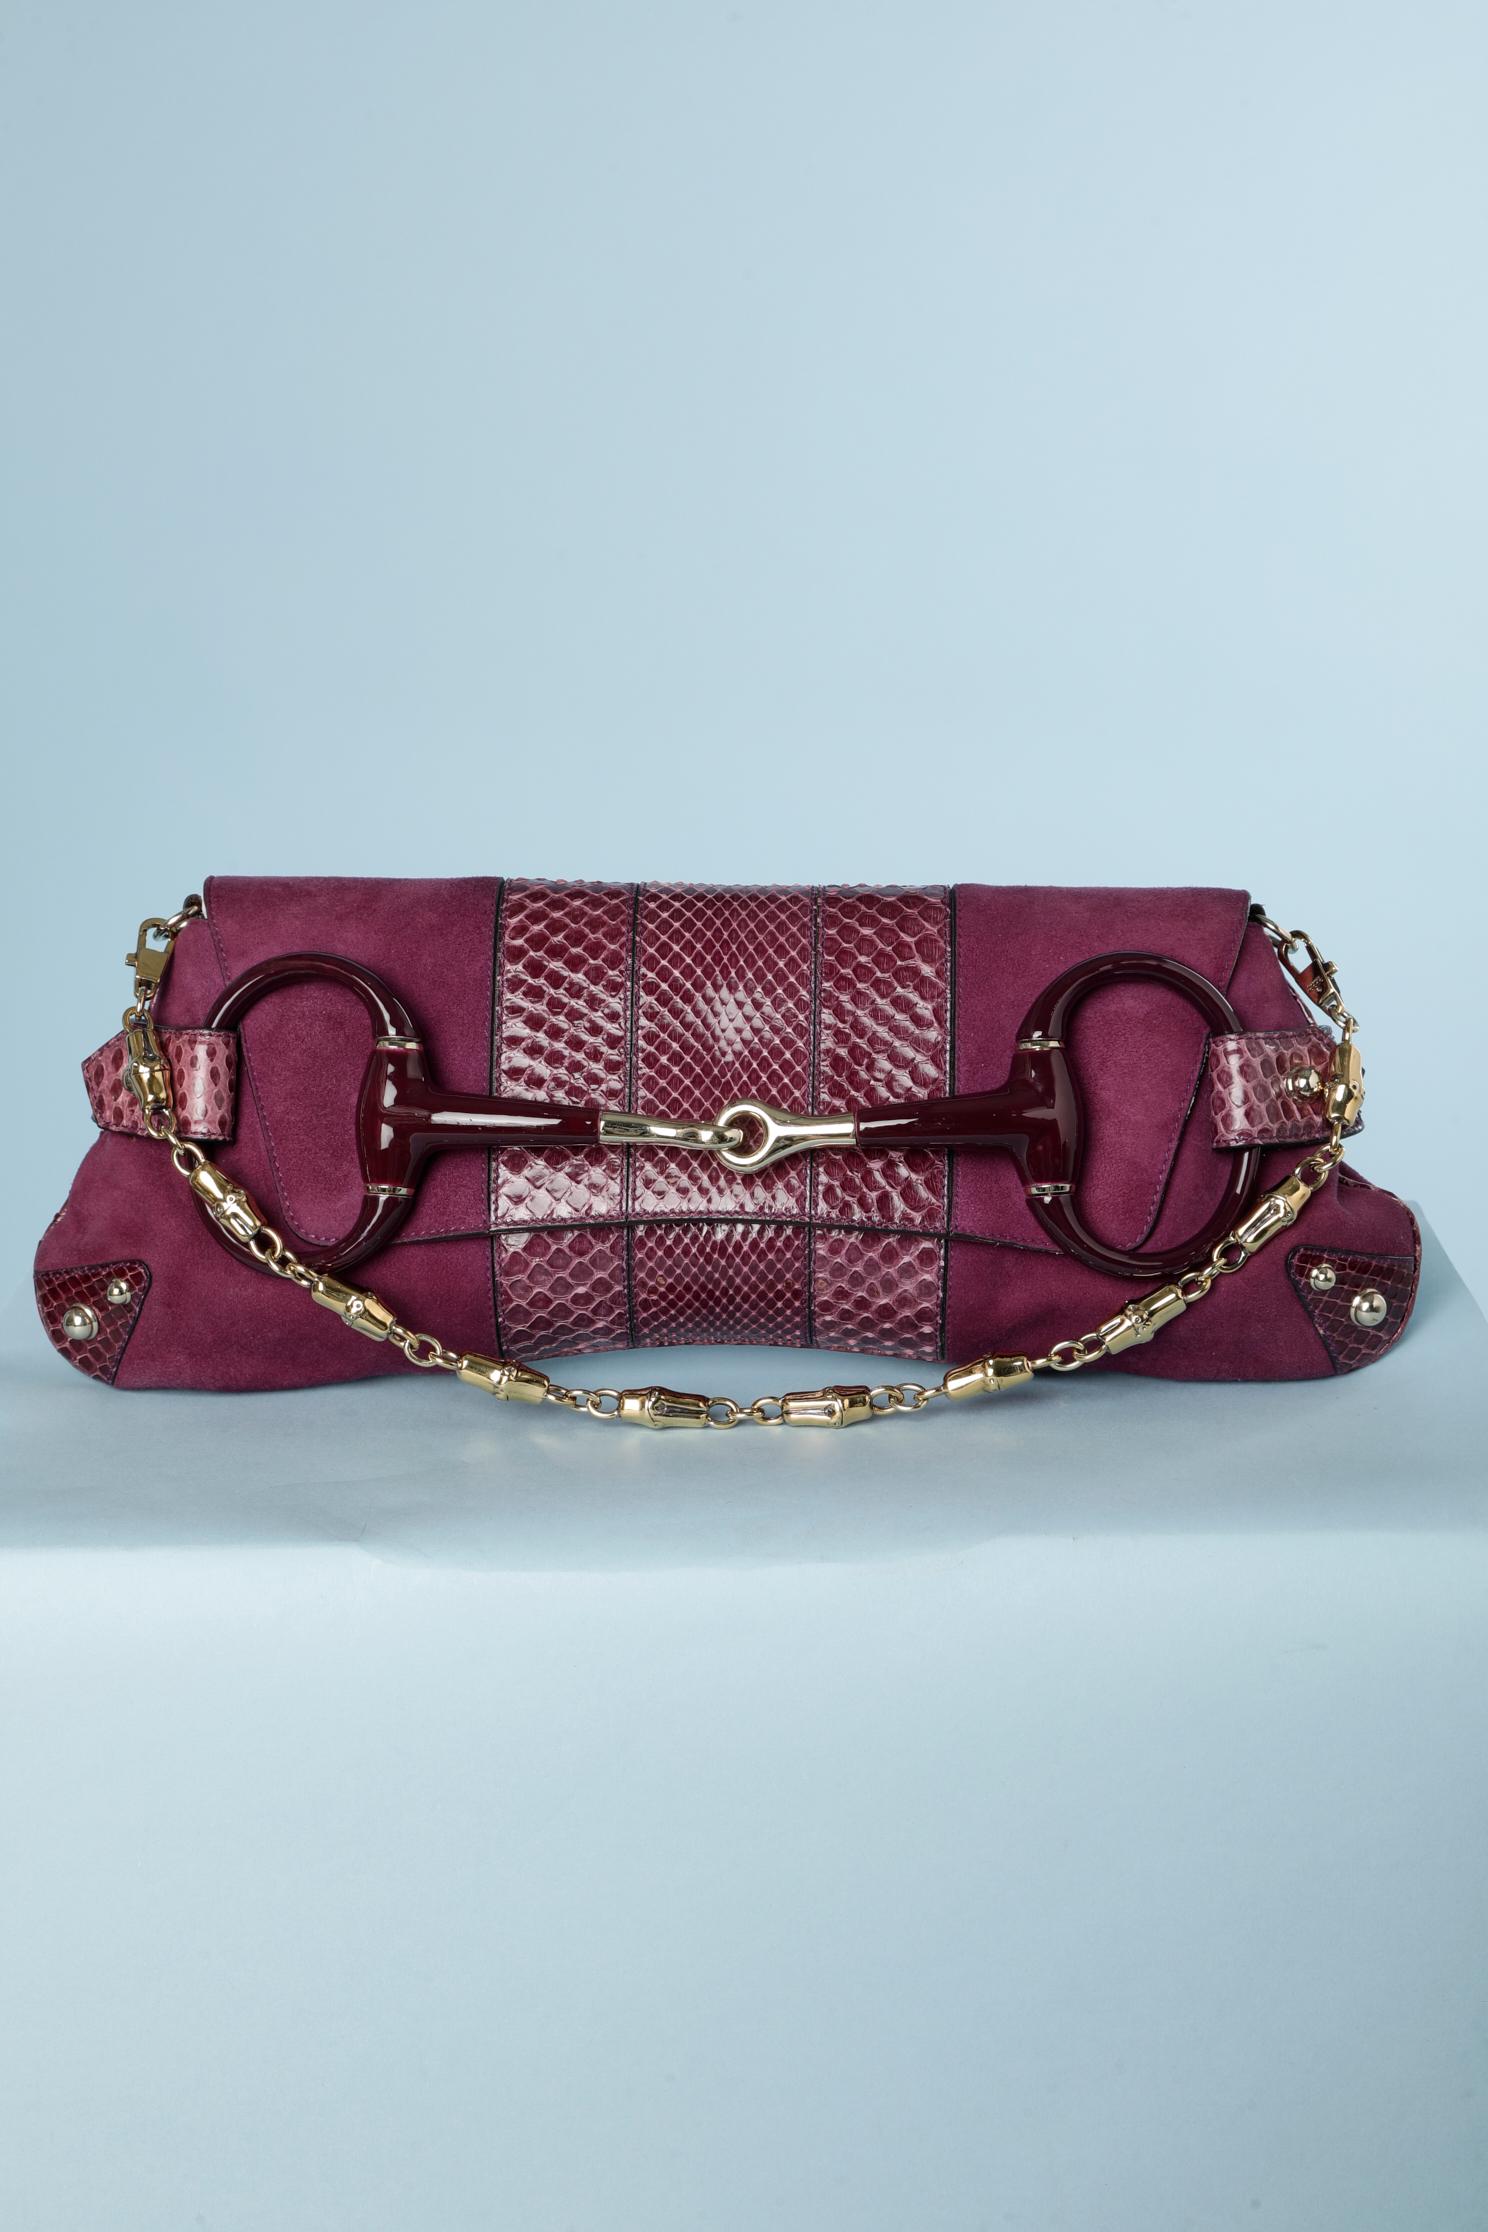 Horsebit purple suede and python chain clutch bag . The lining is in purple satin and burgundy leather. Size: 38 cm X 15 cm